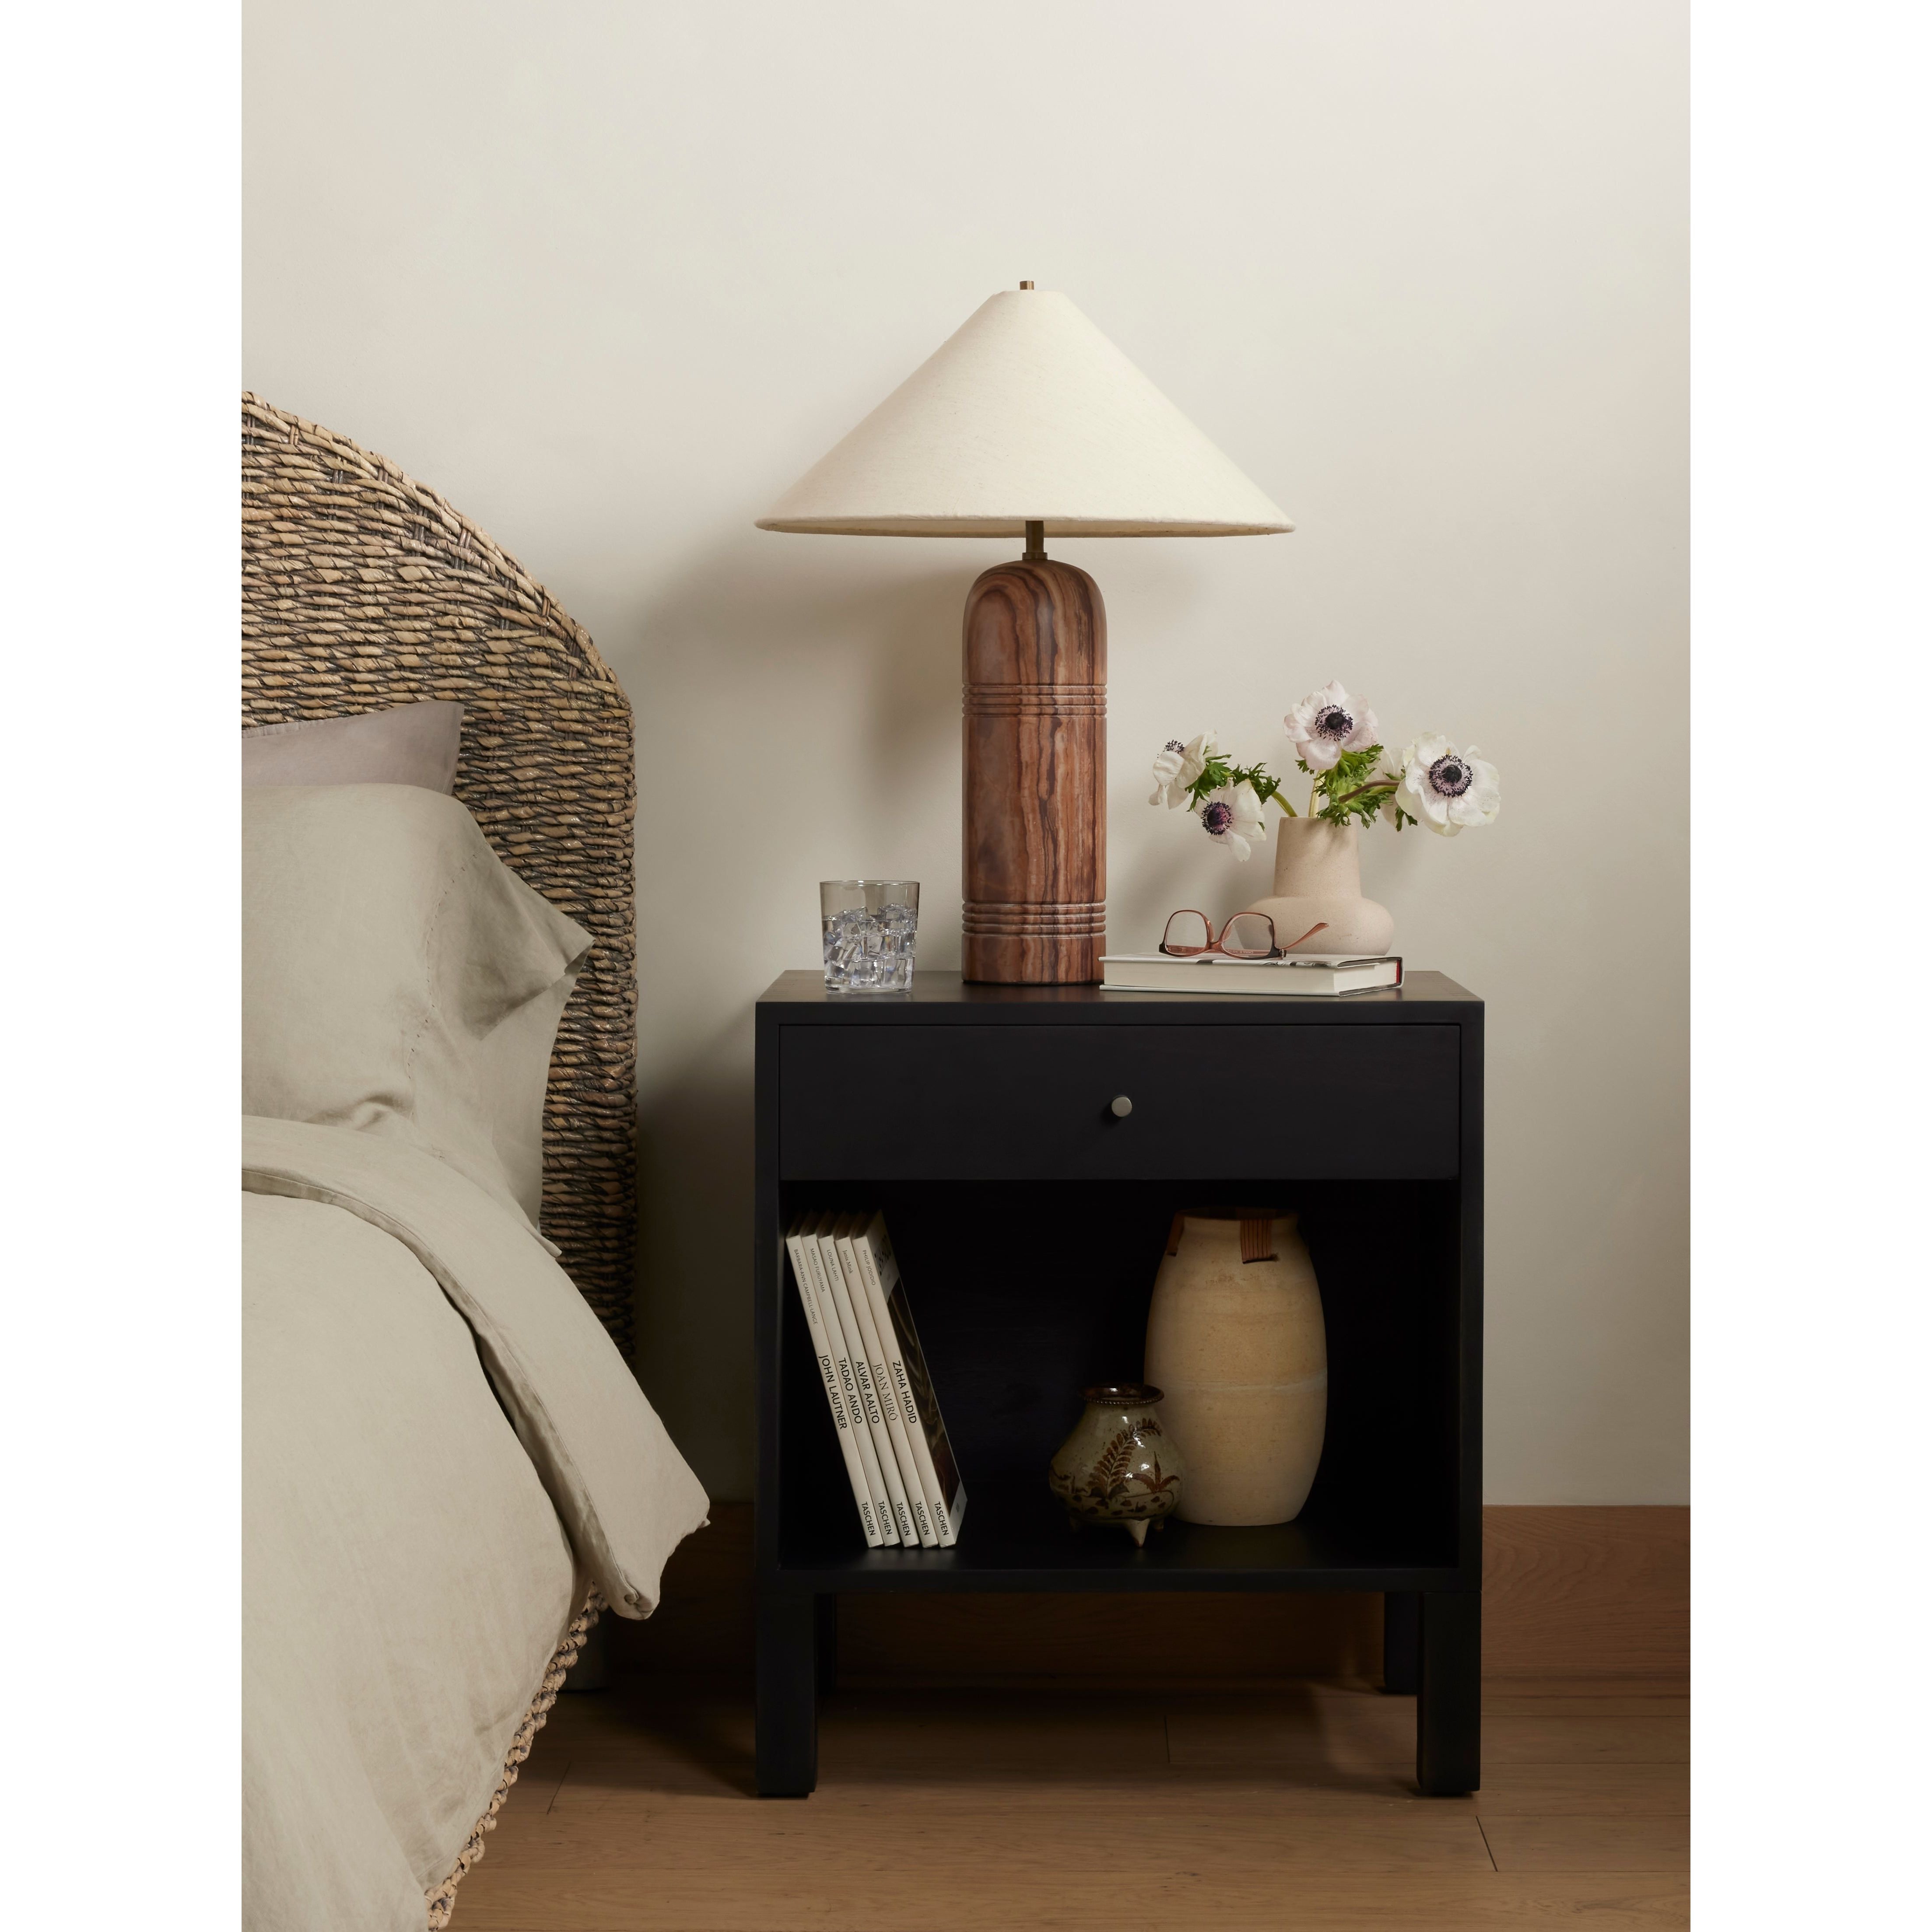 Gather sweet dreams with the Isador Black Wash Poplar Nightstand. The sleek and refined design is perfect for any bedroom. The rich black wash finish creates a timeless look, sure to add elegance and comfort to any décor. Amethyst Home provides interior design, new construction, custom furniture, and area rugs in the Scottsdale metro area.